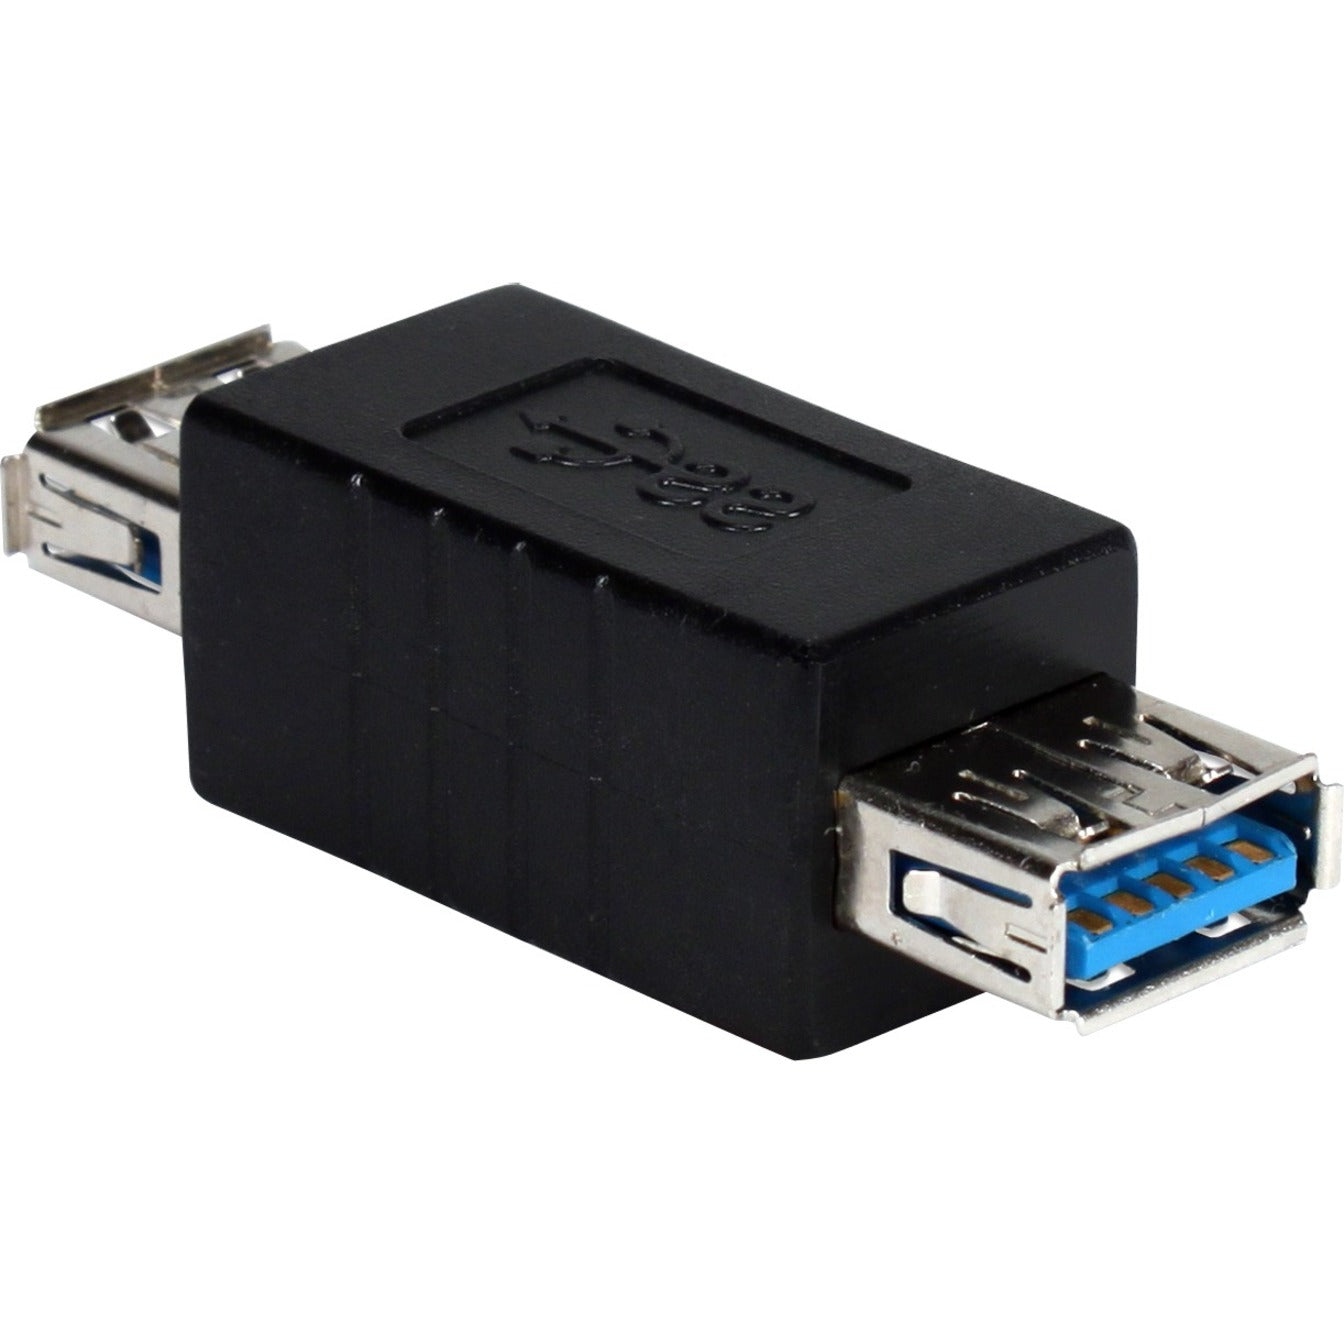 QVS CC2228B-FF USB 3.0/3.1 SuperSpeed Type A Female to Female Gender Changer/Coupler, Data Transfer Adapter